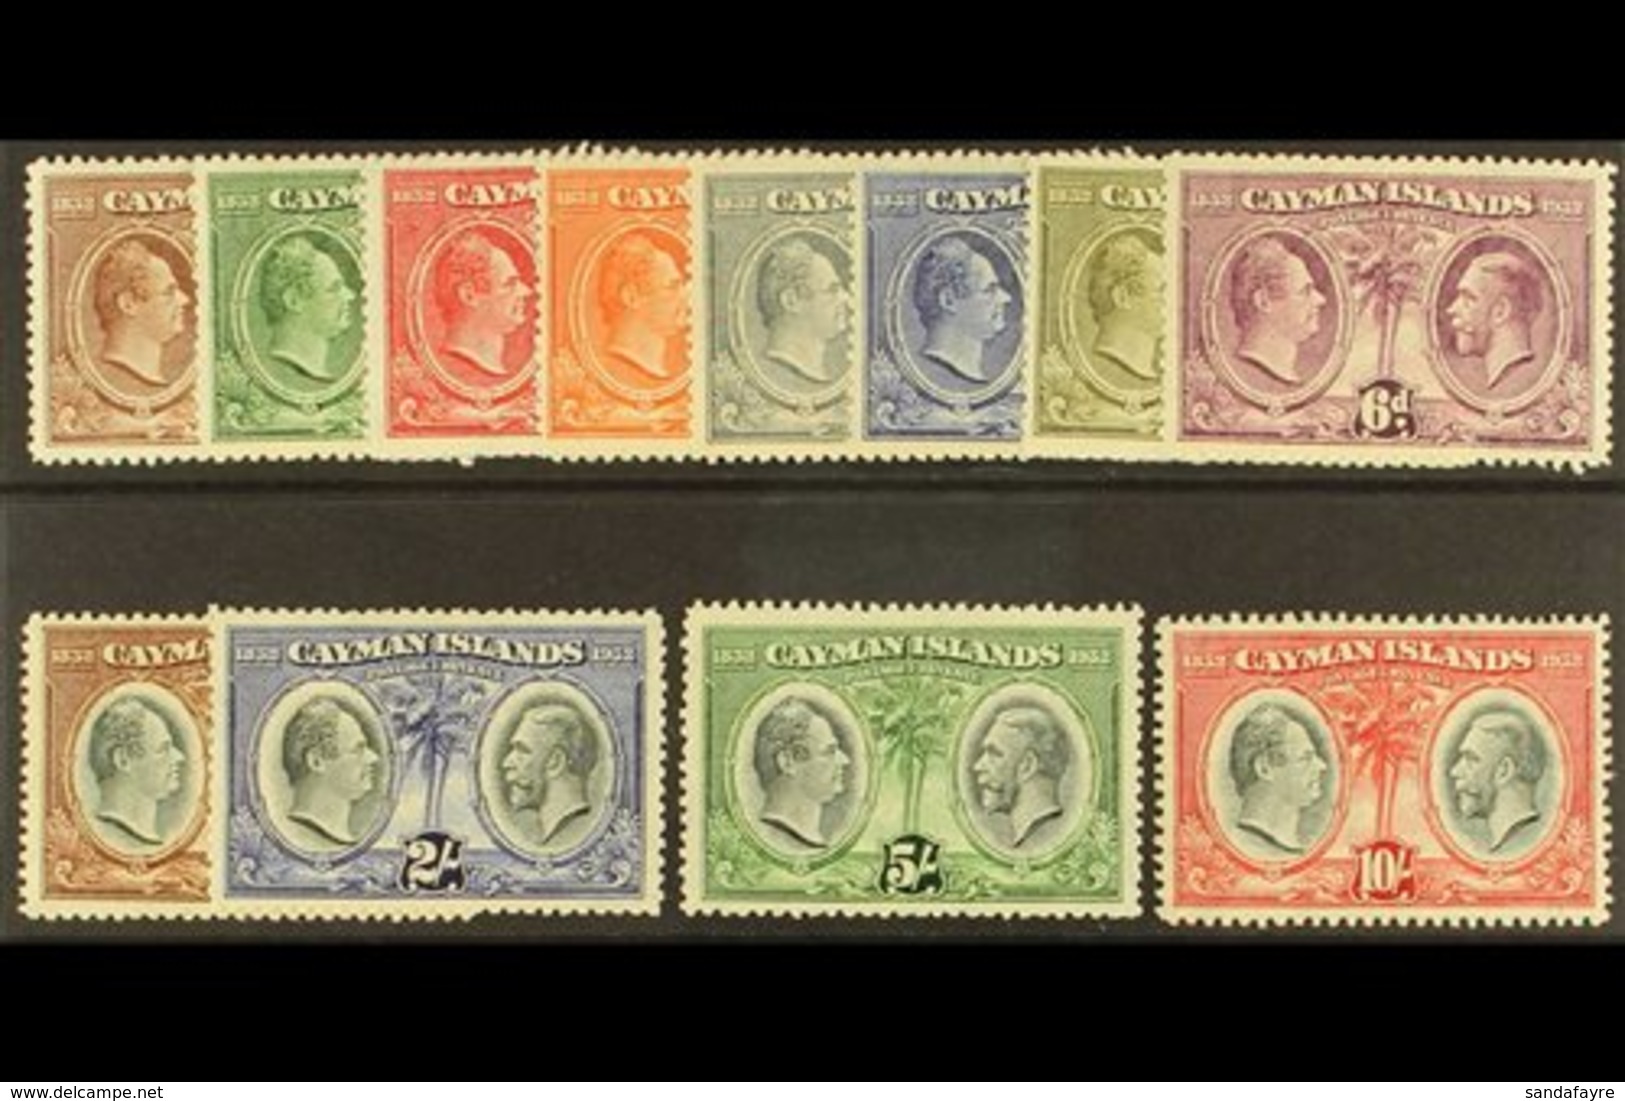 1932 Centenary Set Complete, SG 84/95, Mint Lightly Hinged. Fresh & Lovely (12 Stamps) For More Images, Please Visit Htt - Caimán (Islas)